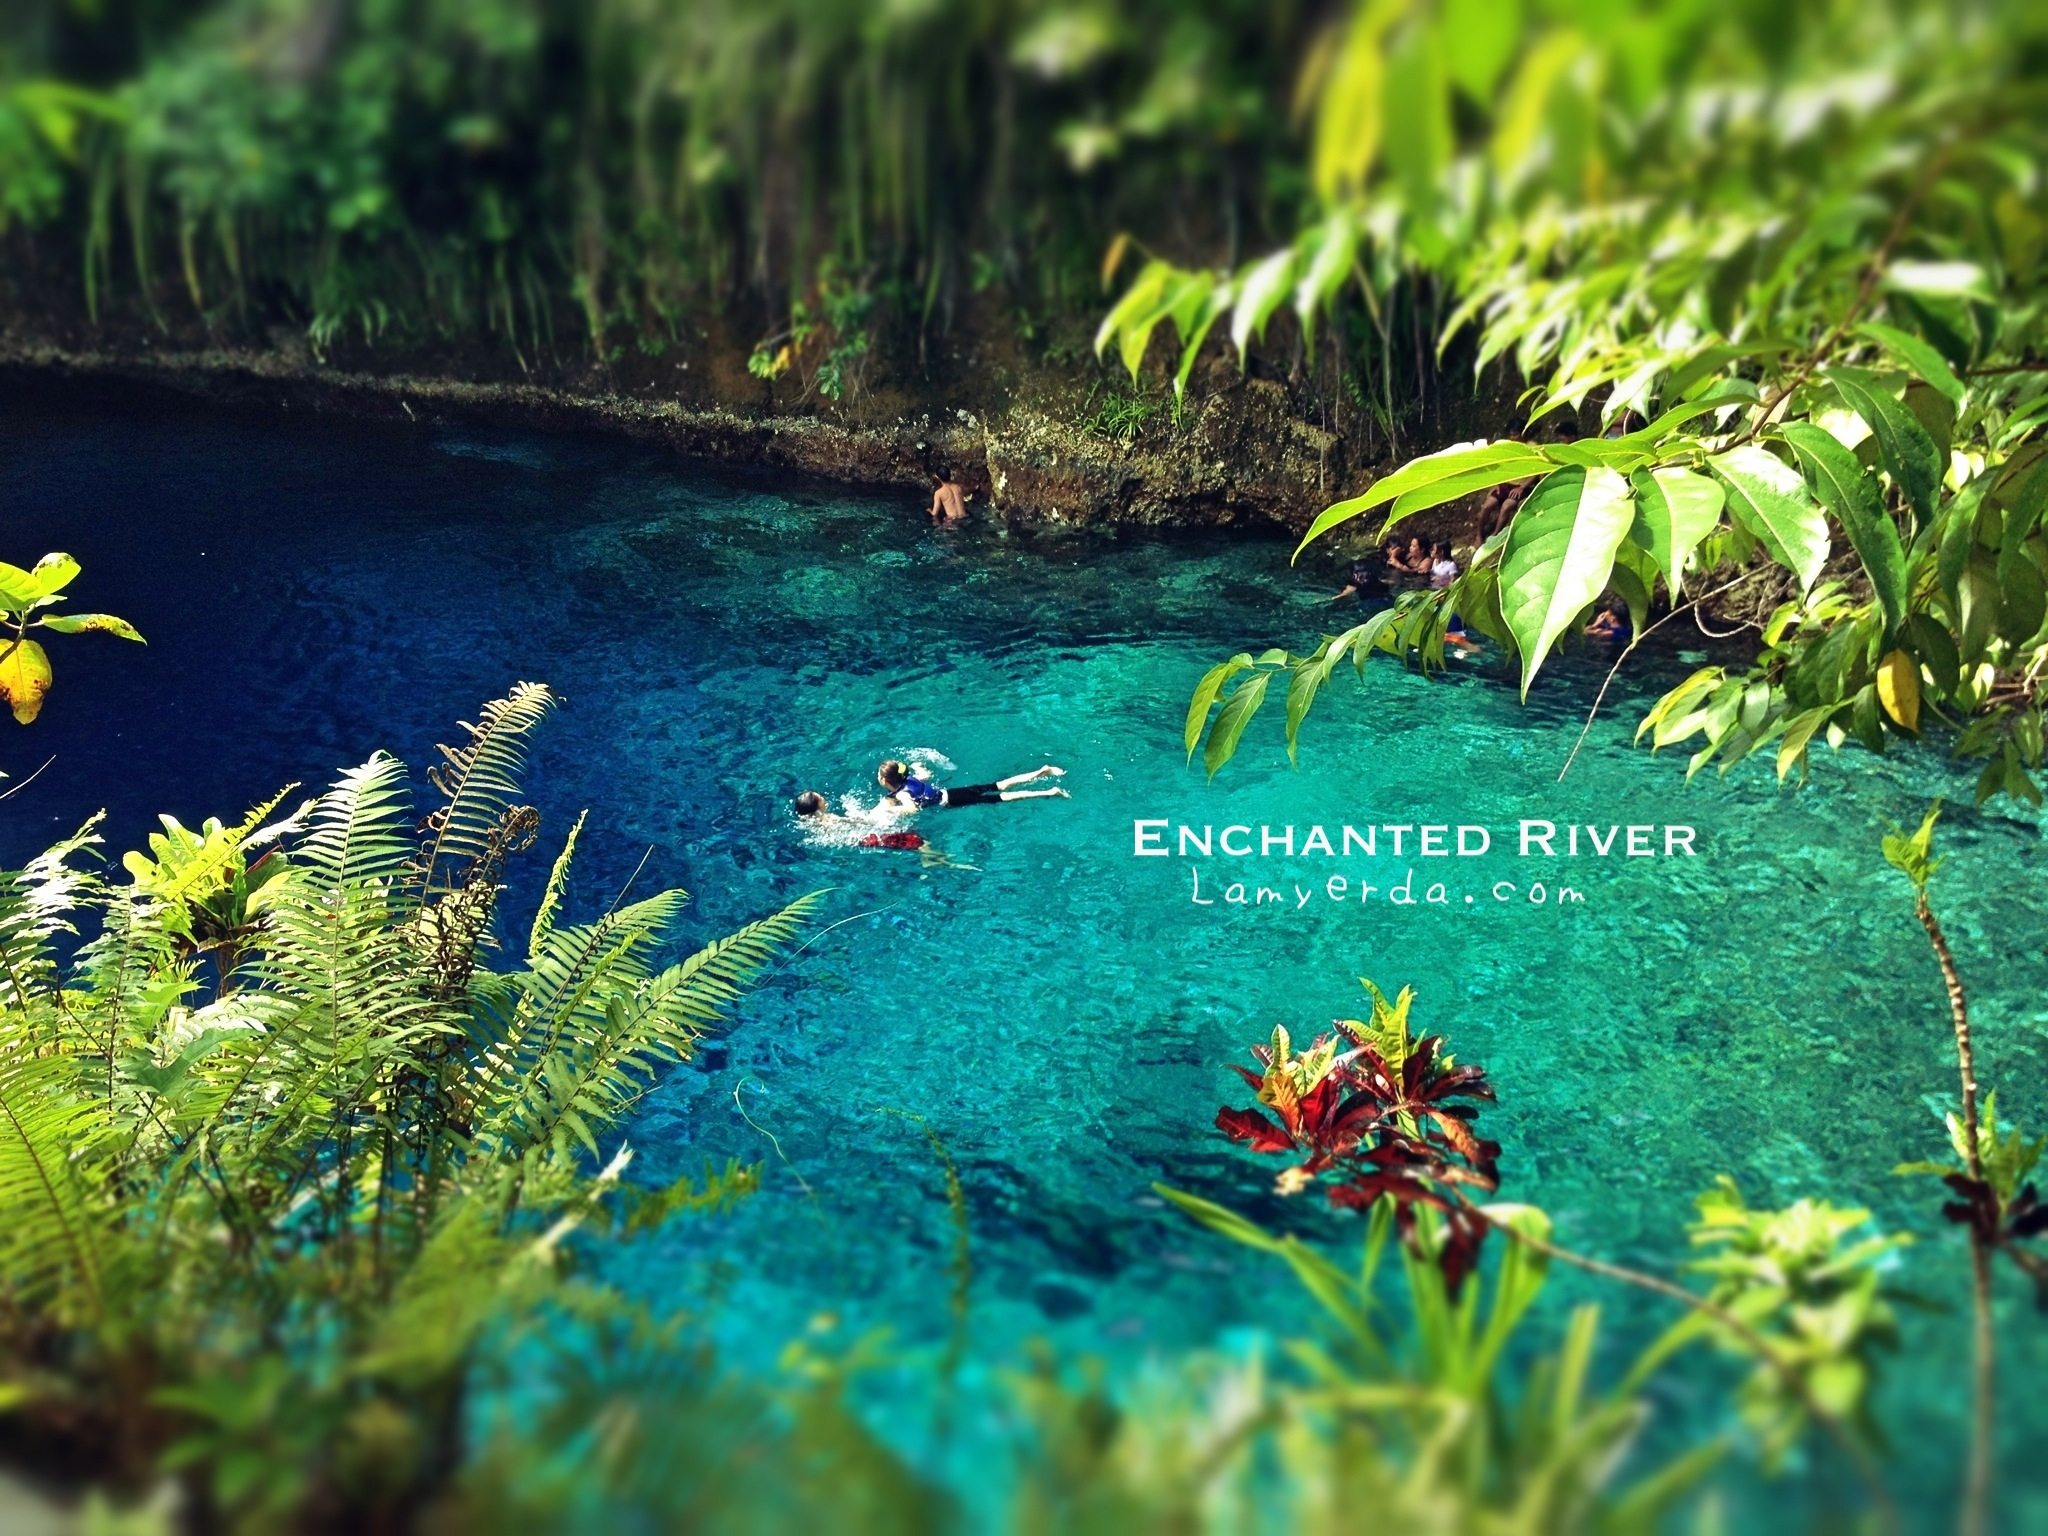 The Road to Enchanted River: The Day I fell off the Habal- Habal